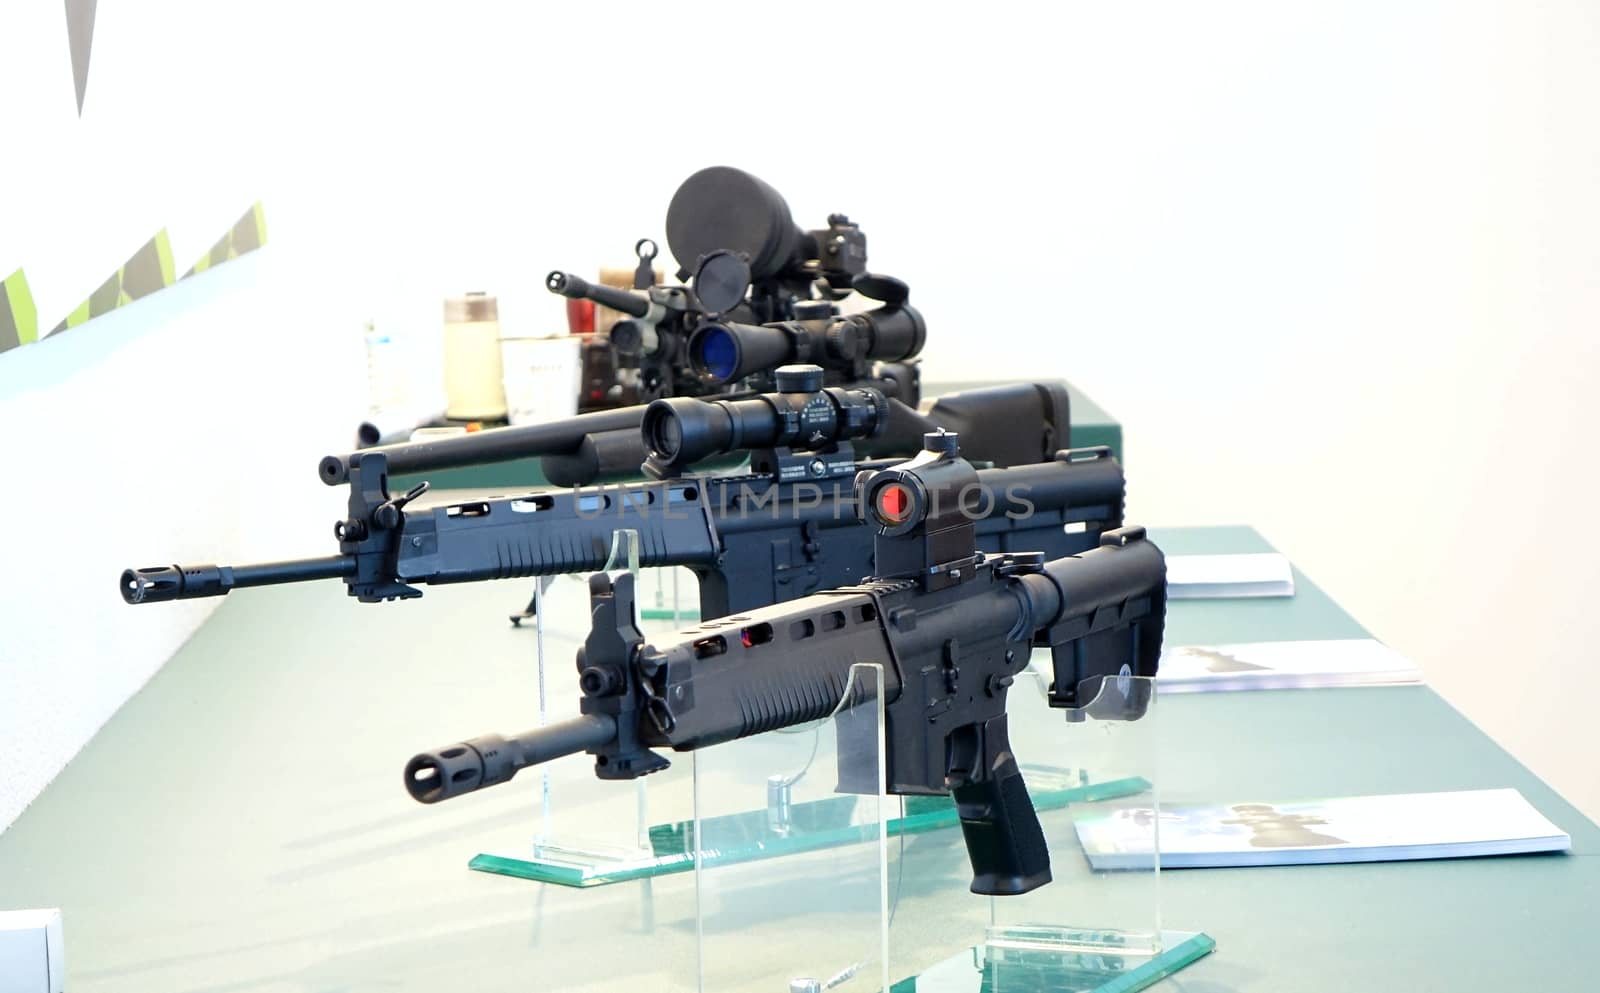 KAOHSIUNG, TAIWAN -- SEPTEMBER 29, 2018: High velocity rifles are on display at the Kaohsiung International Maritime & Defence Expo